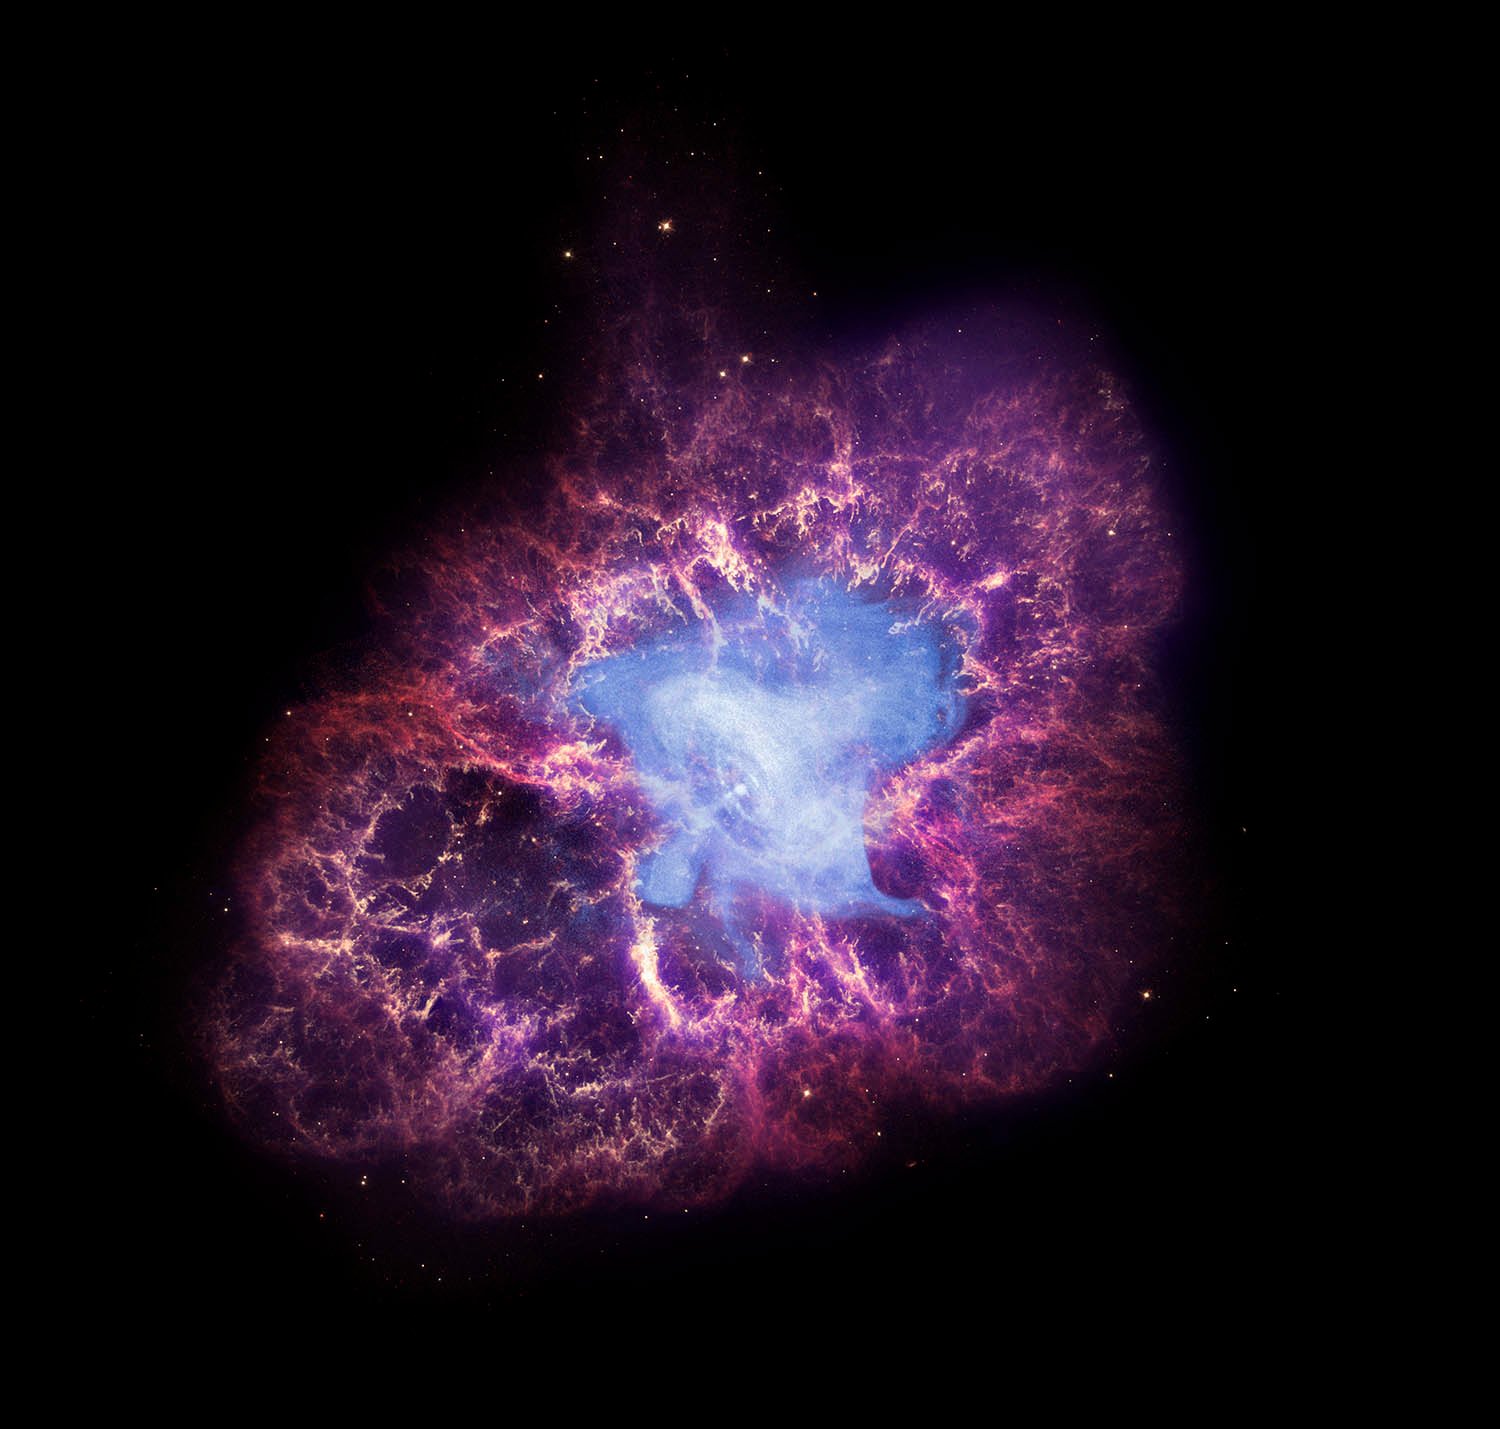 Crab Nebula Nasa 2270 Hd Wallpapers in Space   Imagescicom